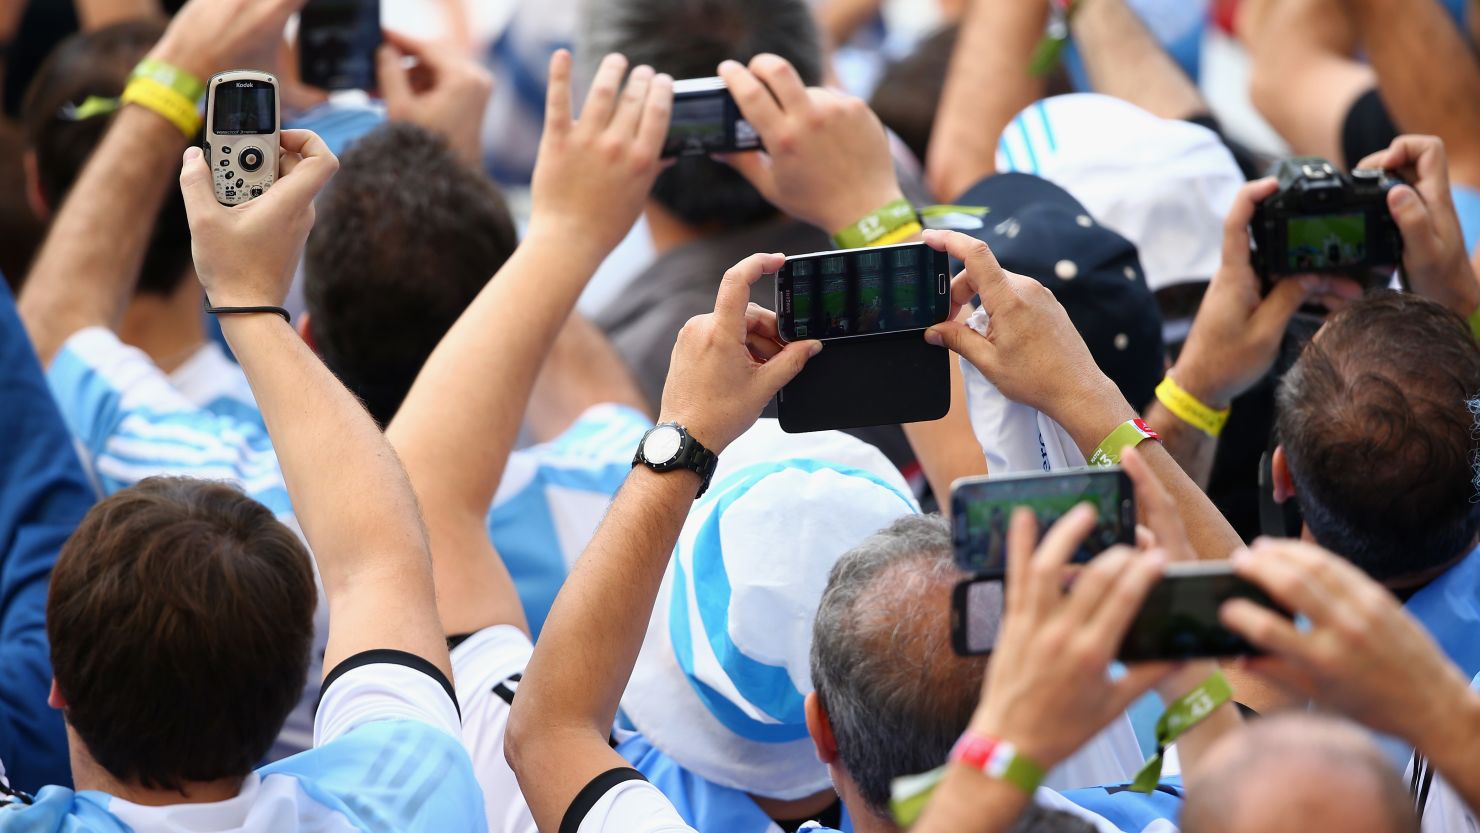 Social media has played a huge role in the popularity of the 2014 FIFA World Cup this year.